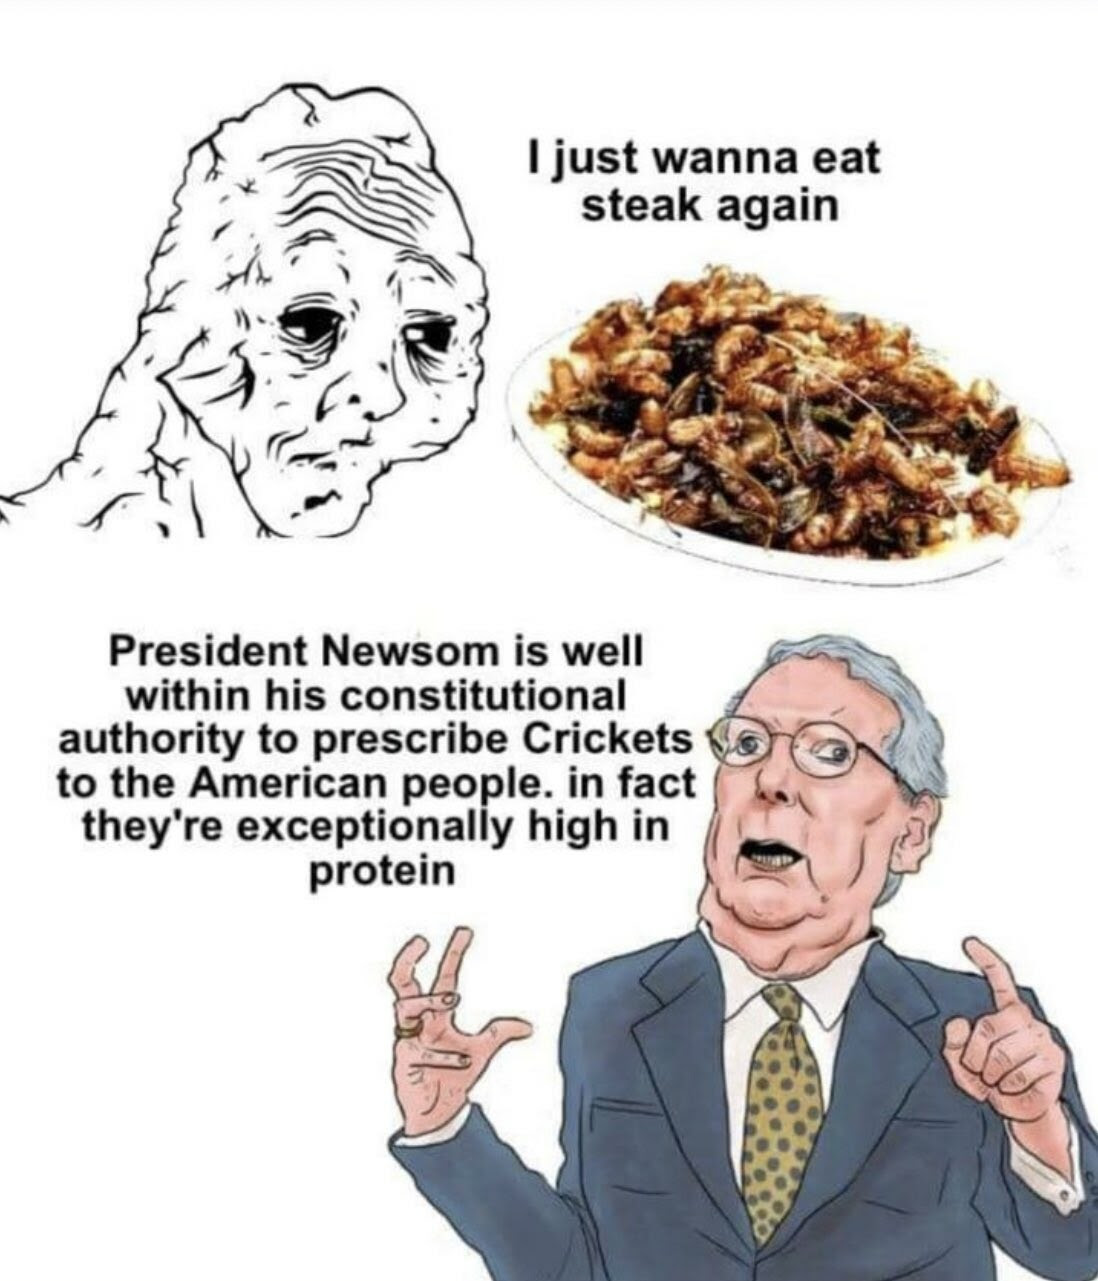 Art indicating that Mitch McConnell would obey Gavin Newsom and have us eating crickets.